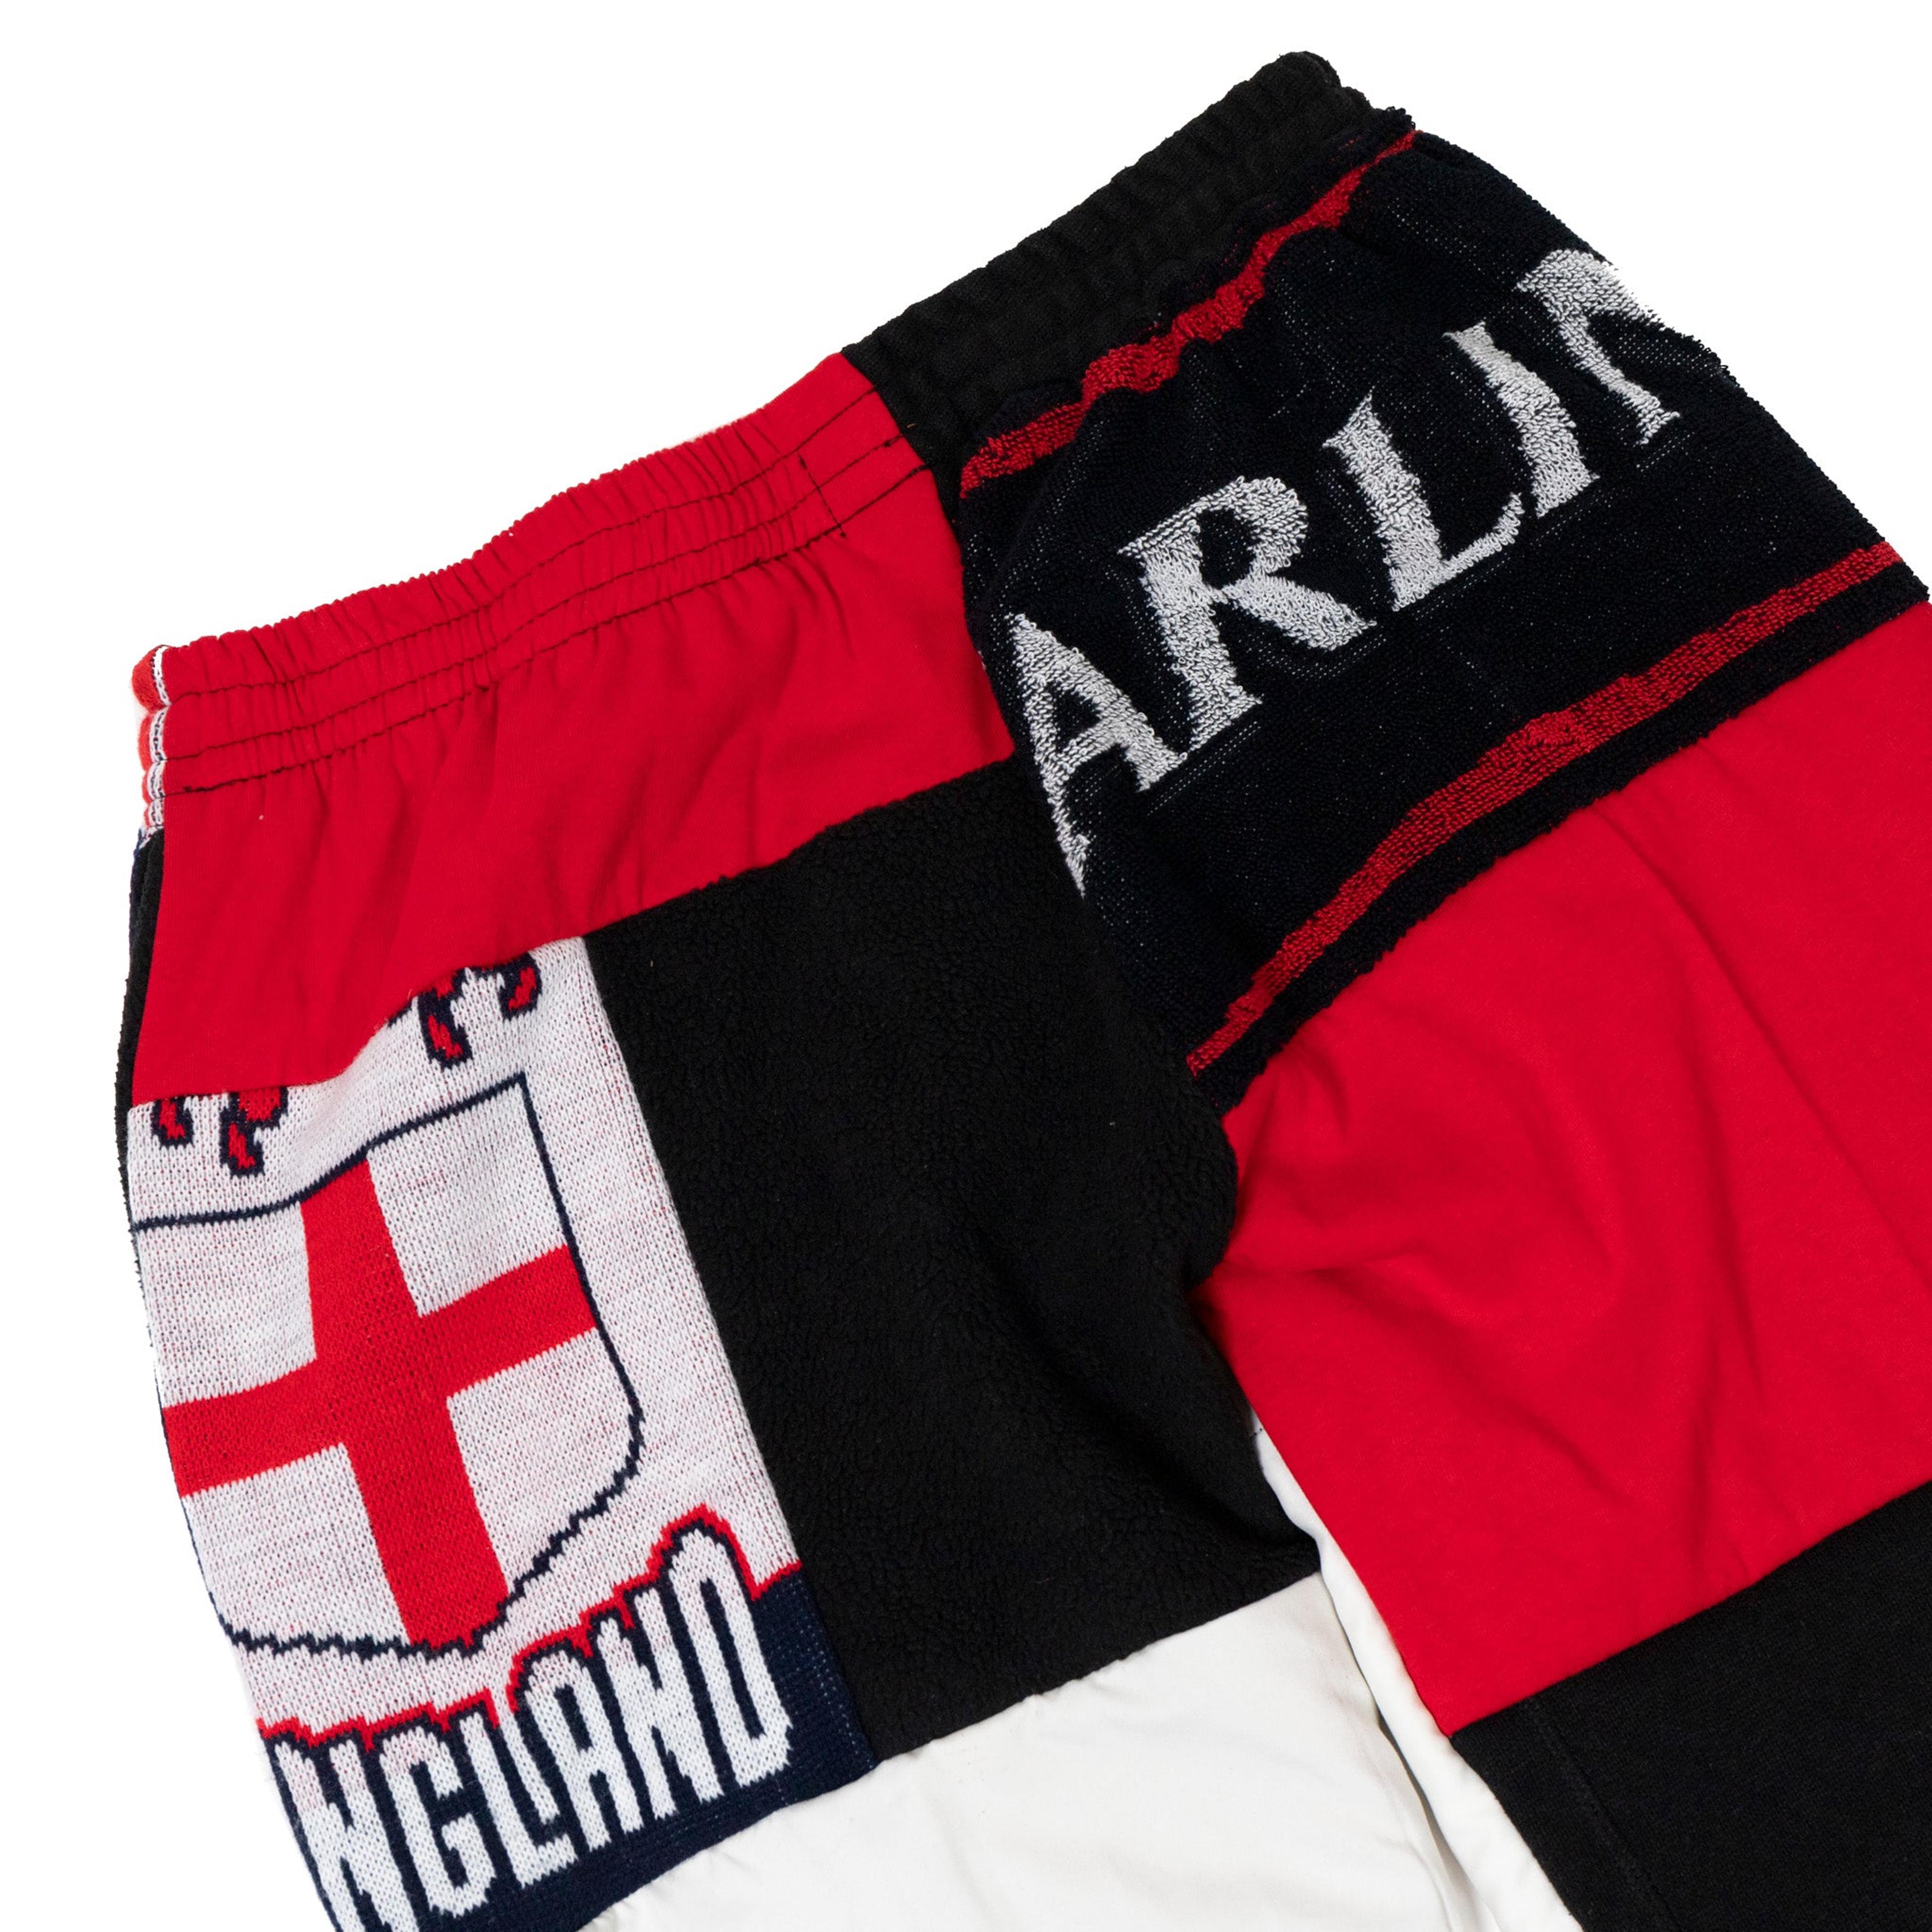 Alternate View 7 of VT Rework: The '98 England x Carling x Umbro Joggers